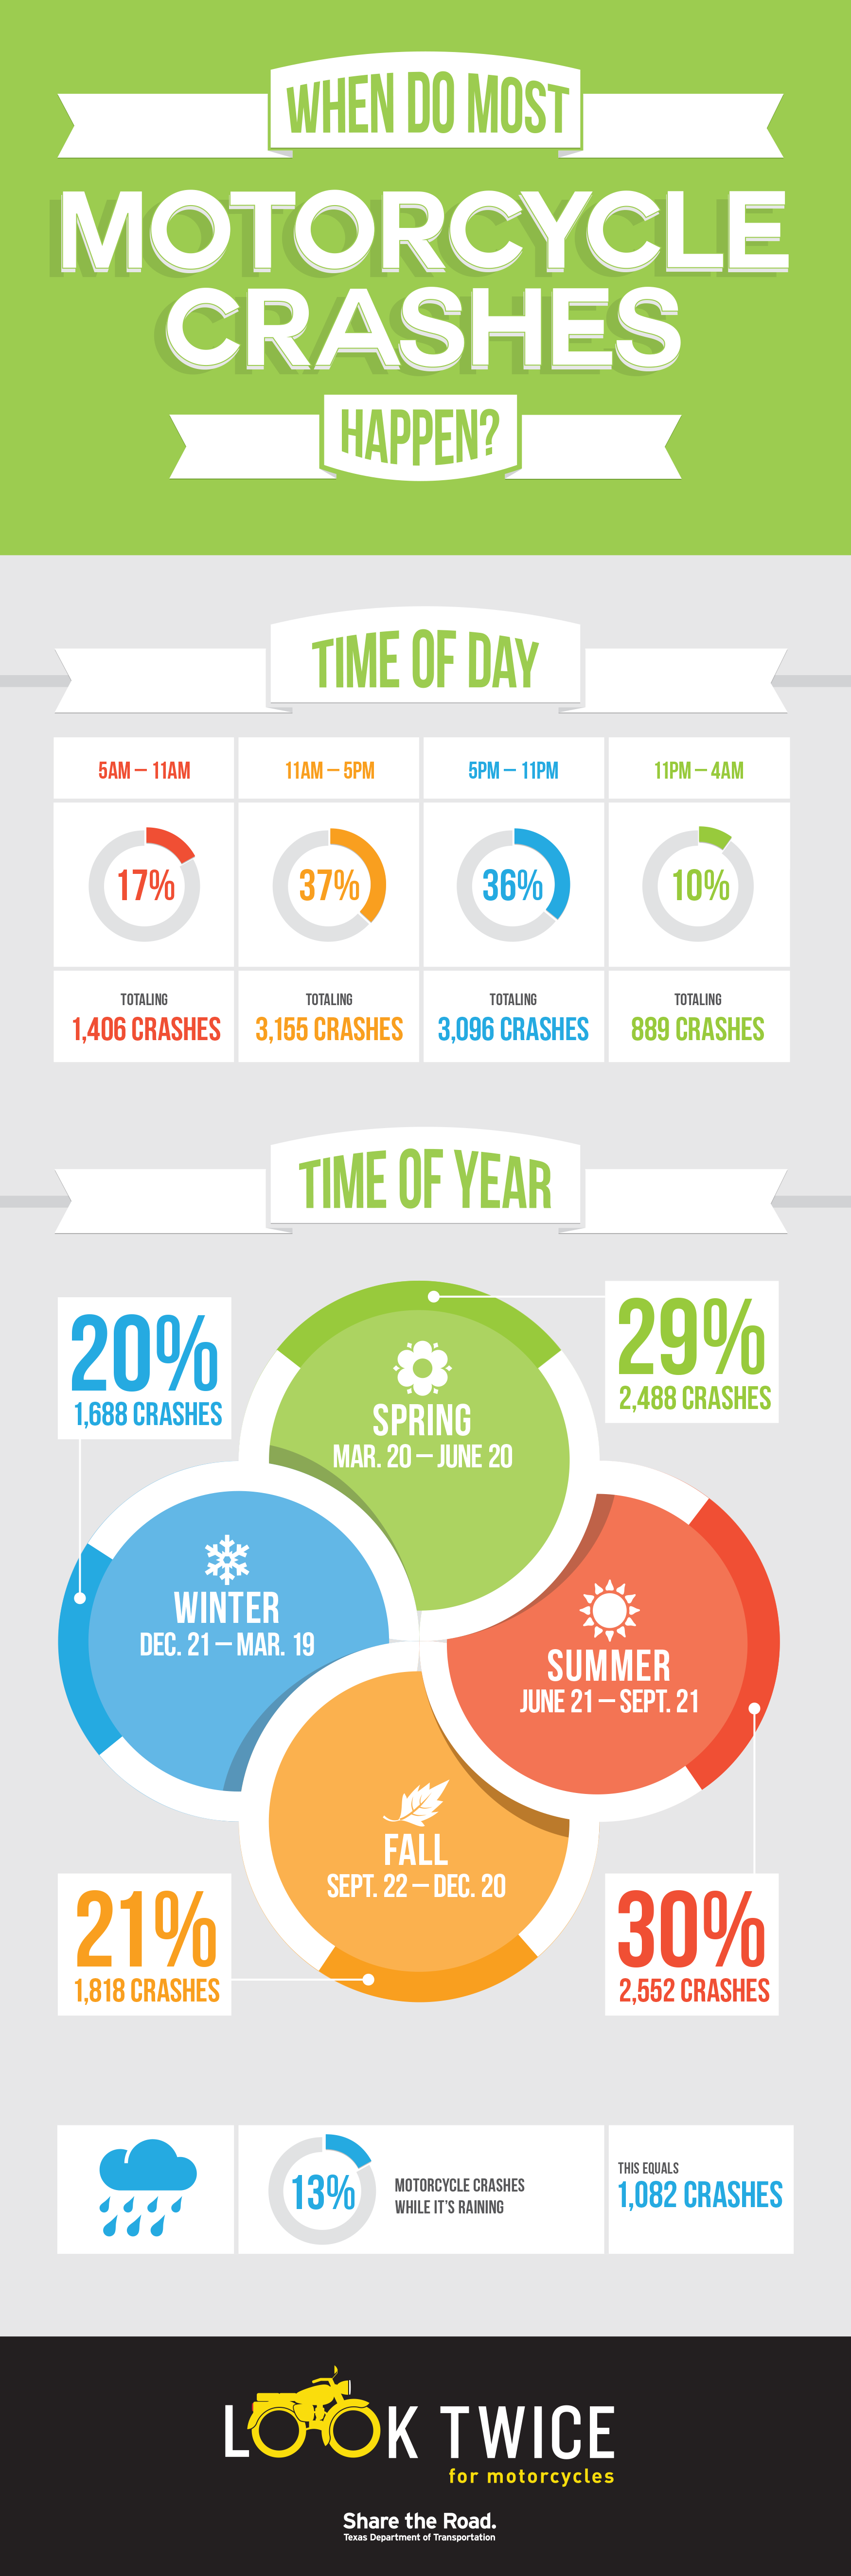 Infographic showing crash time of day and time of year